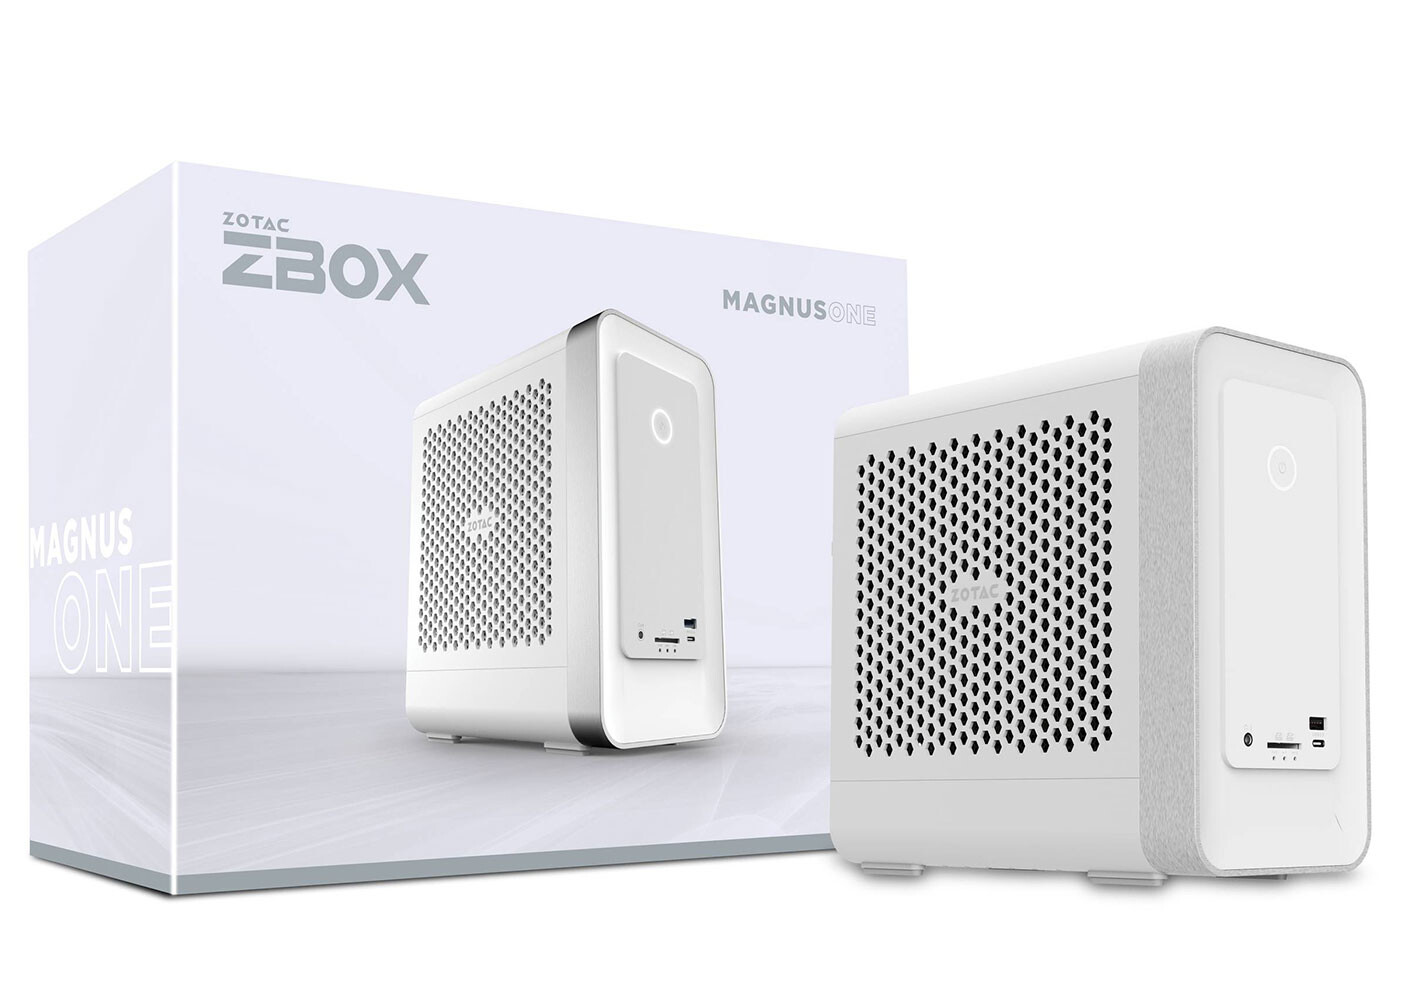 ZOTAC Unveils the Latest ZBOX E Series and C Series Mini PC Lineup